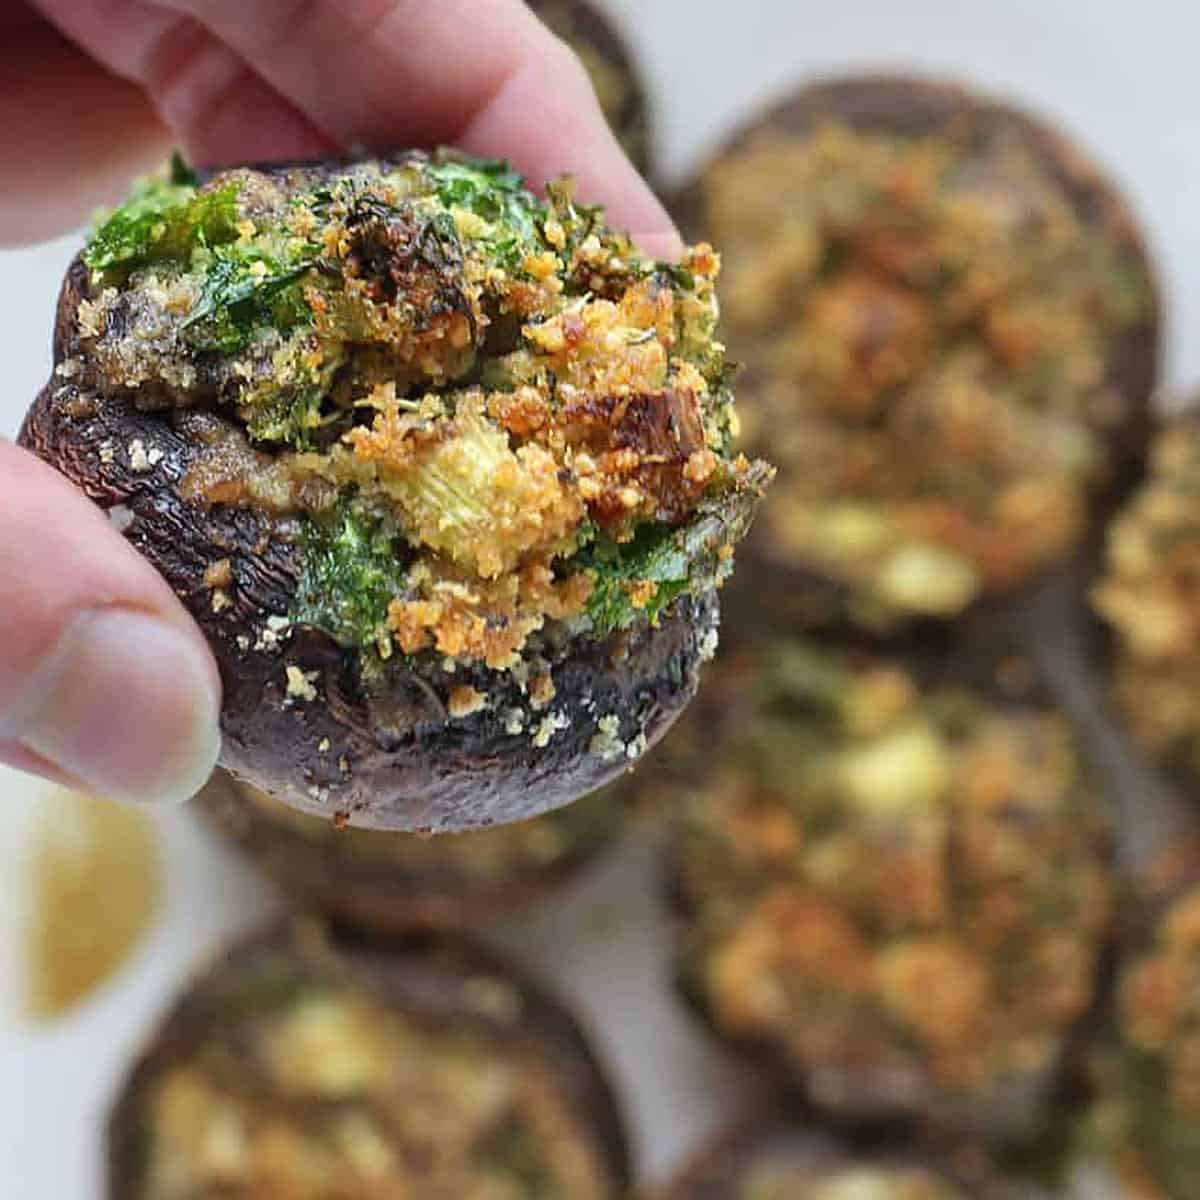 stuffed mushrooms in a platter in a stack and holding a hand.